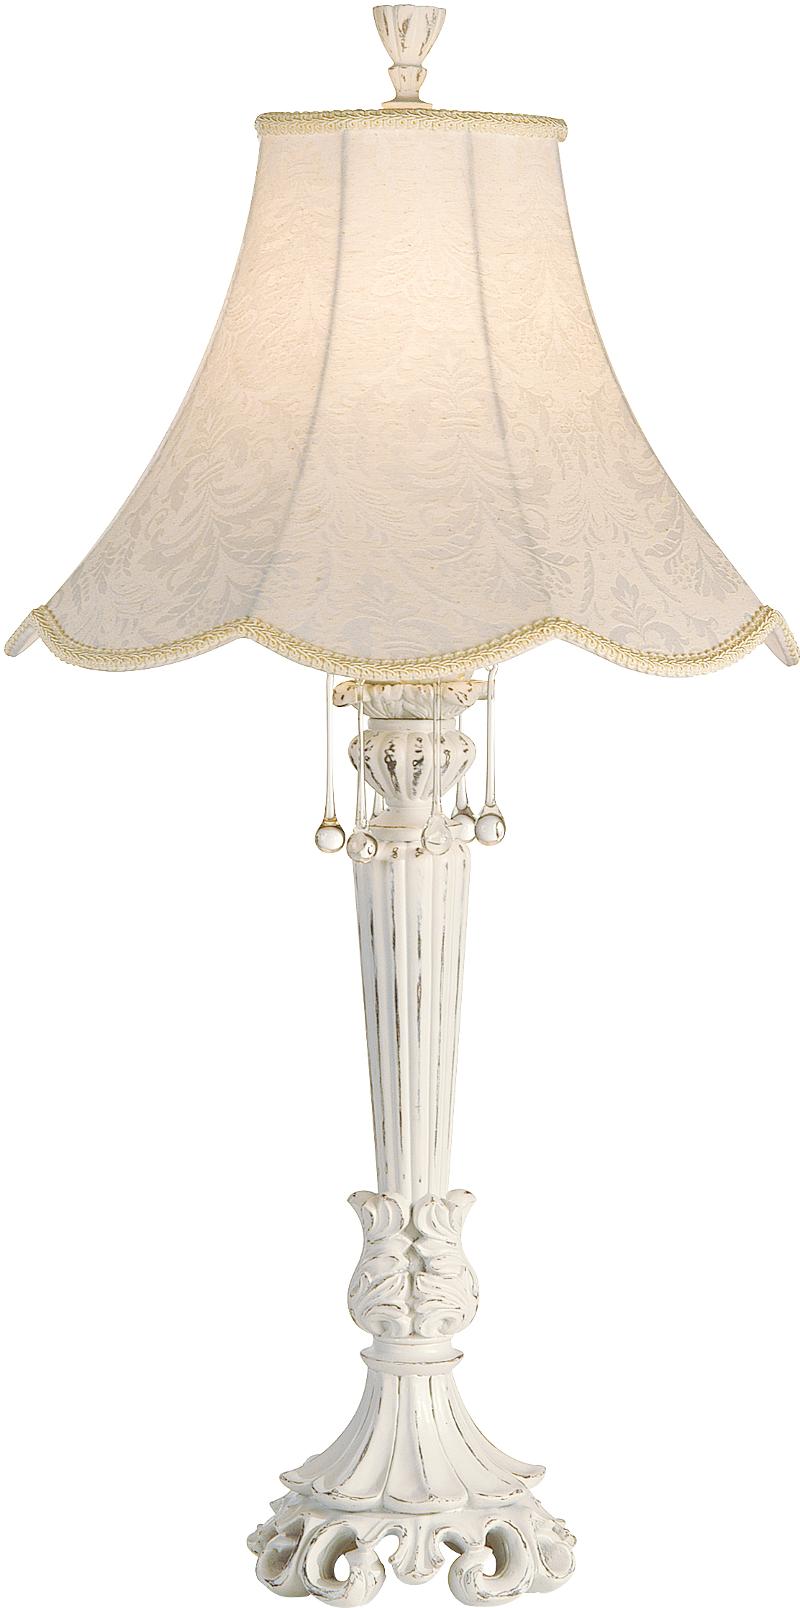 Distressed White Traditional Table Lamp, White Vintage Table Lamp